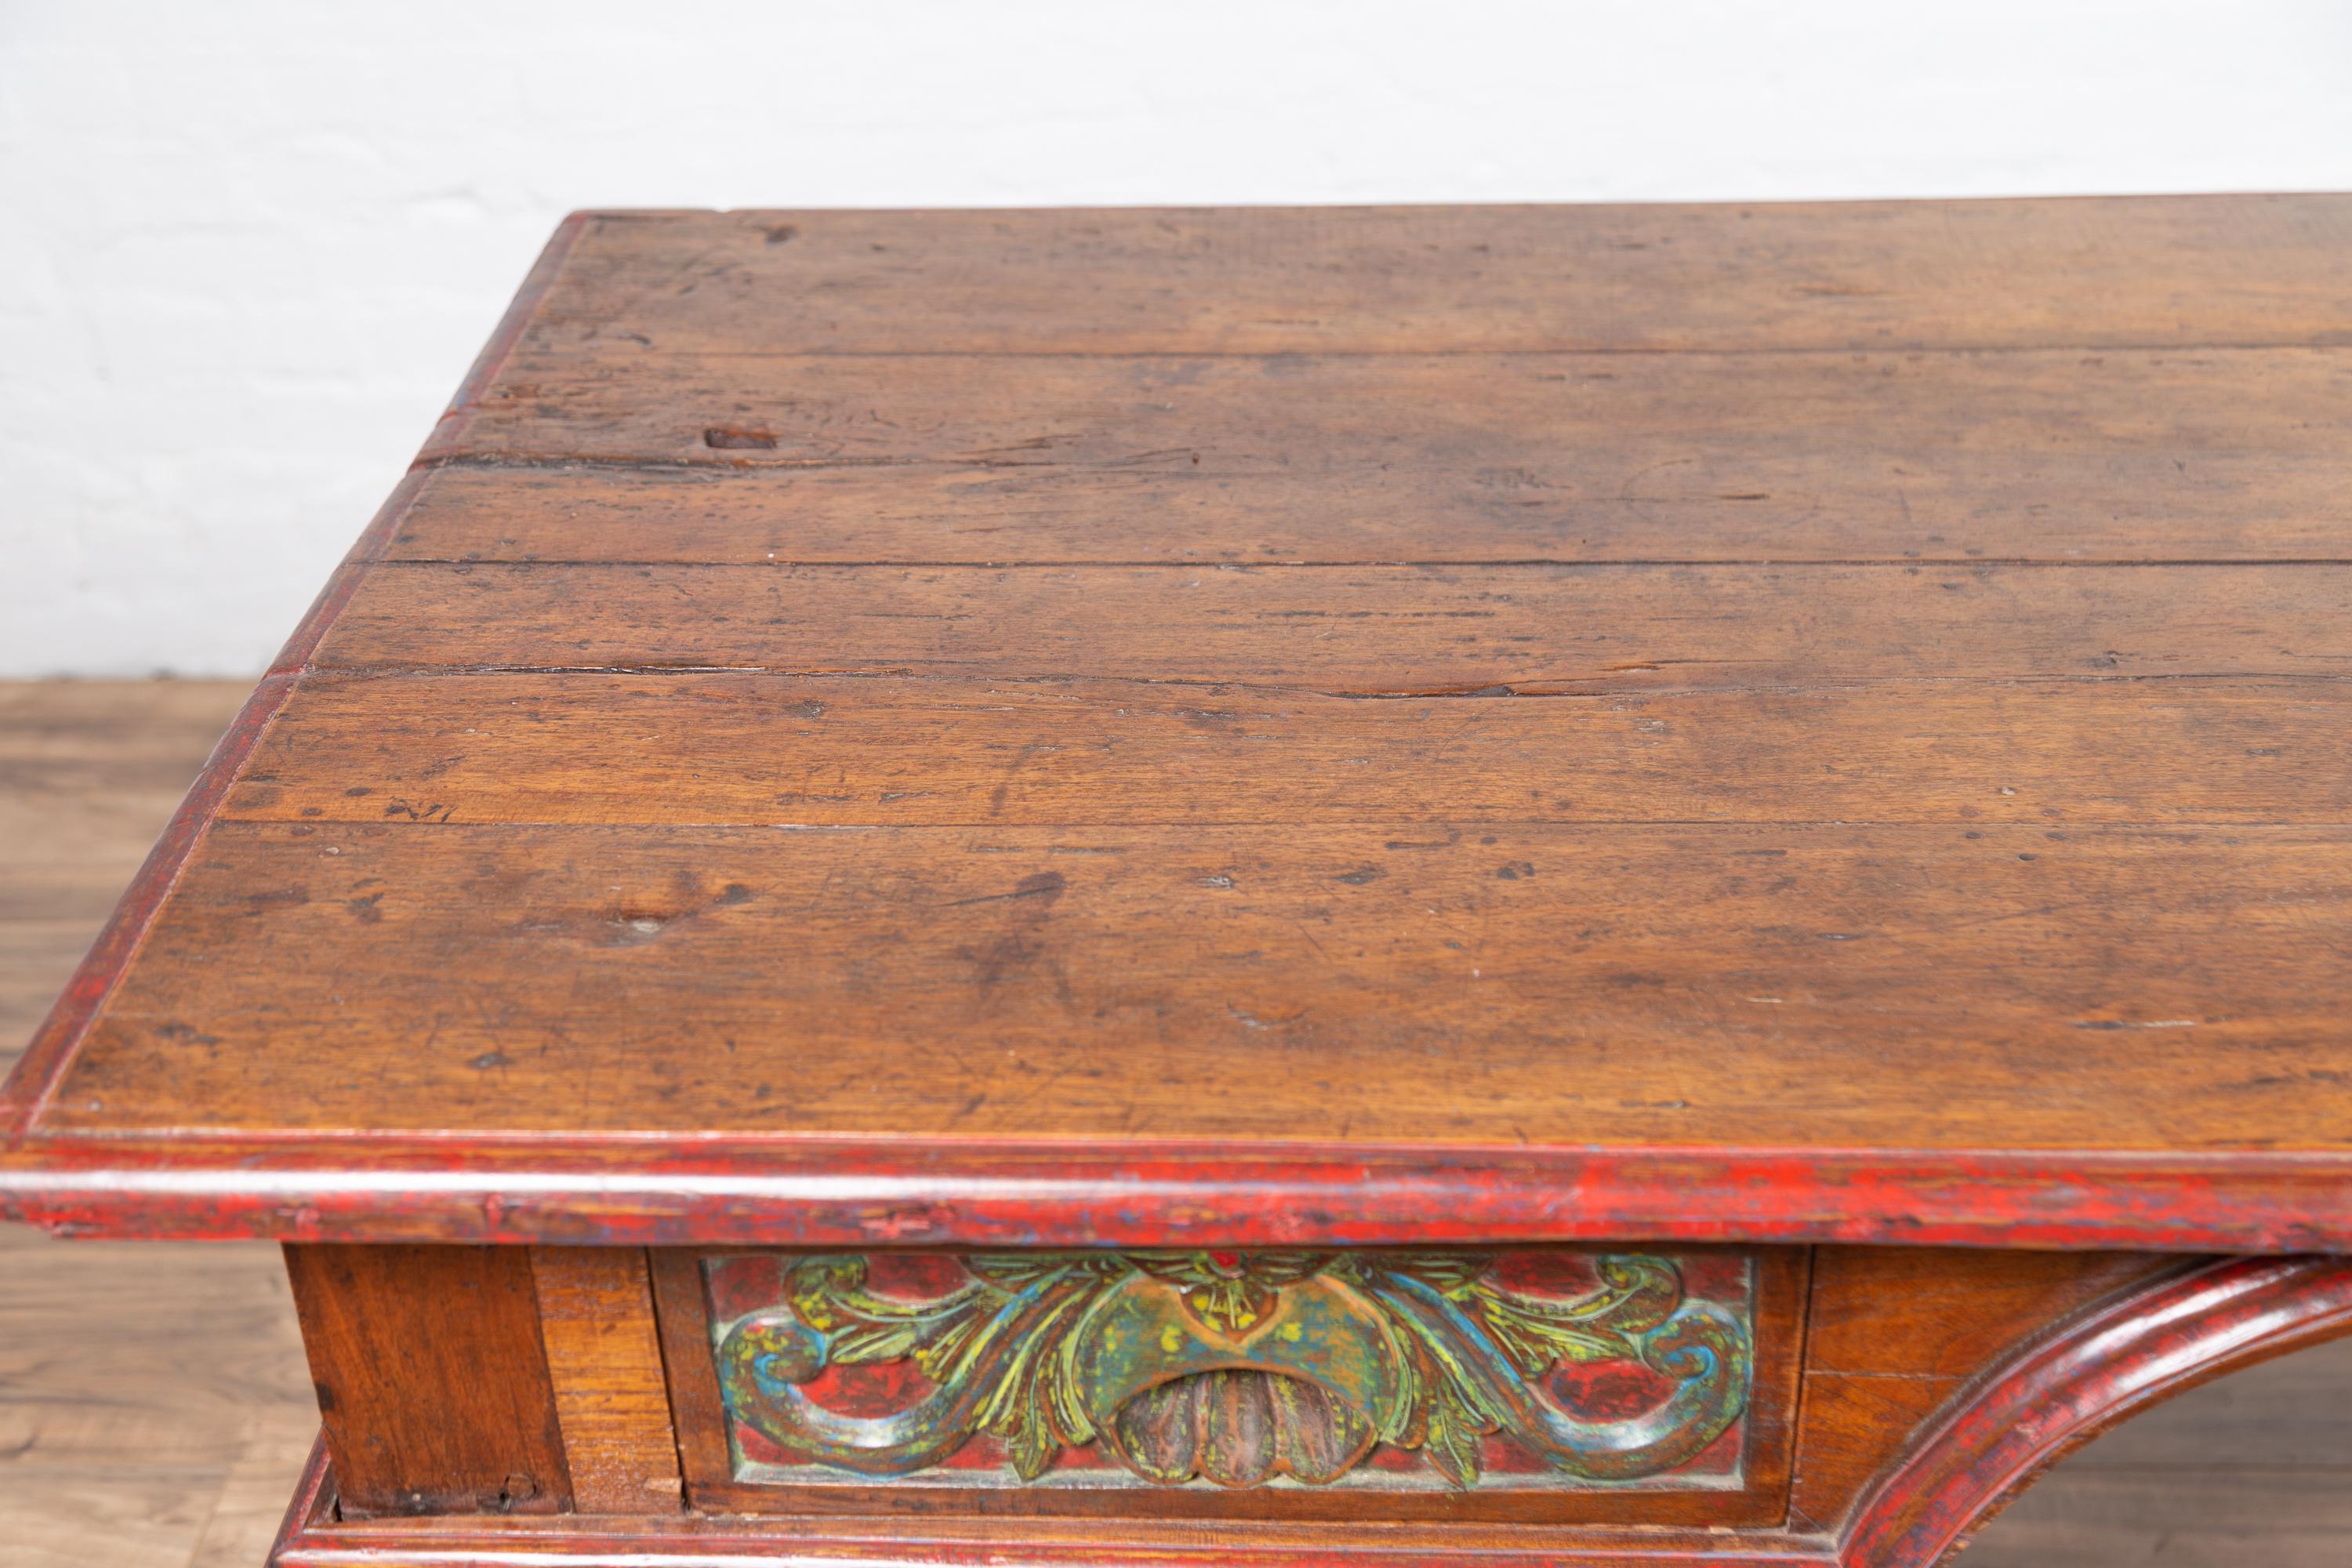 Wood Antique Javanese Kneehole Desk with Polychrome Finish, Drawers and Carved Decor